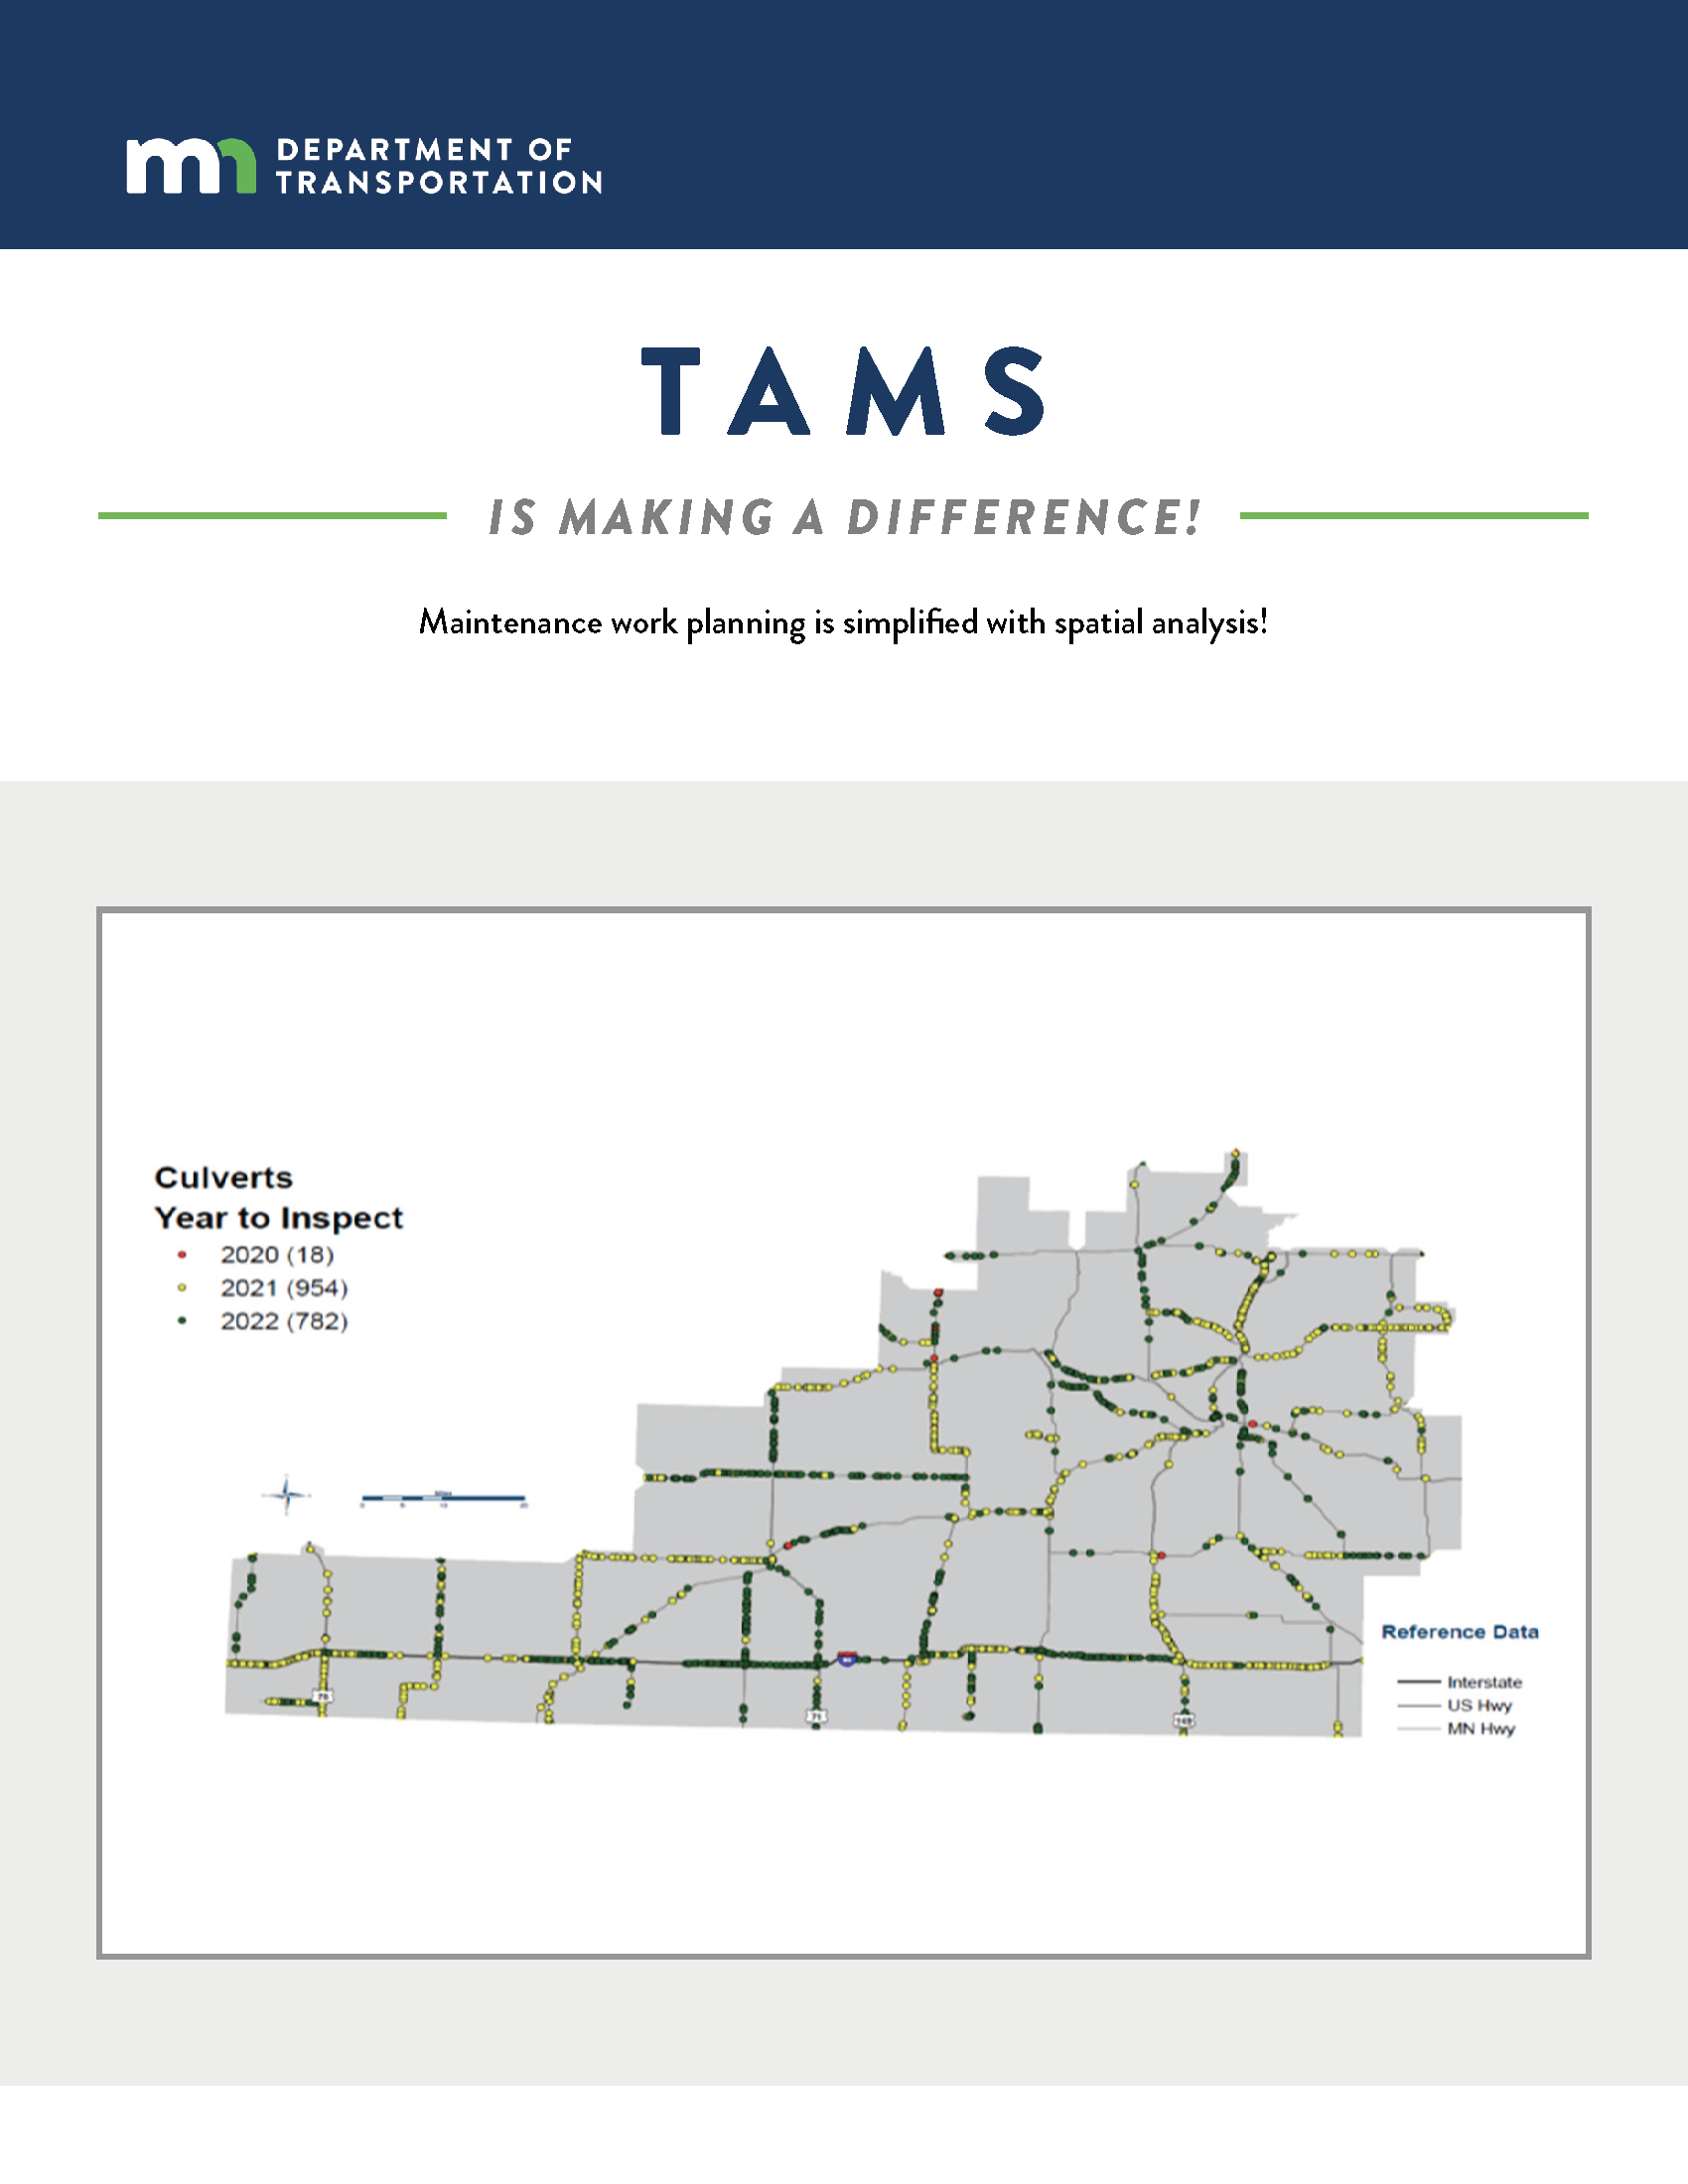 TAMS Difference - Work Planning (flyer)